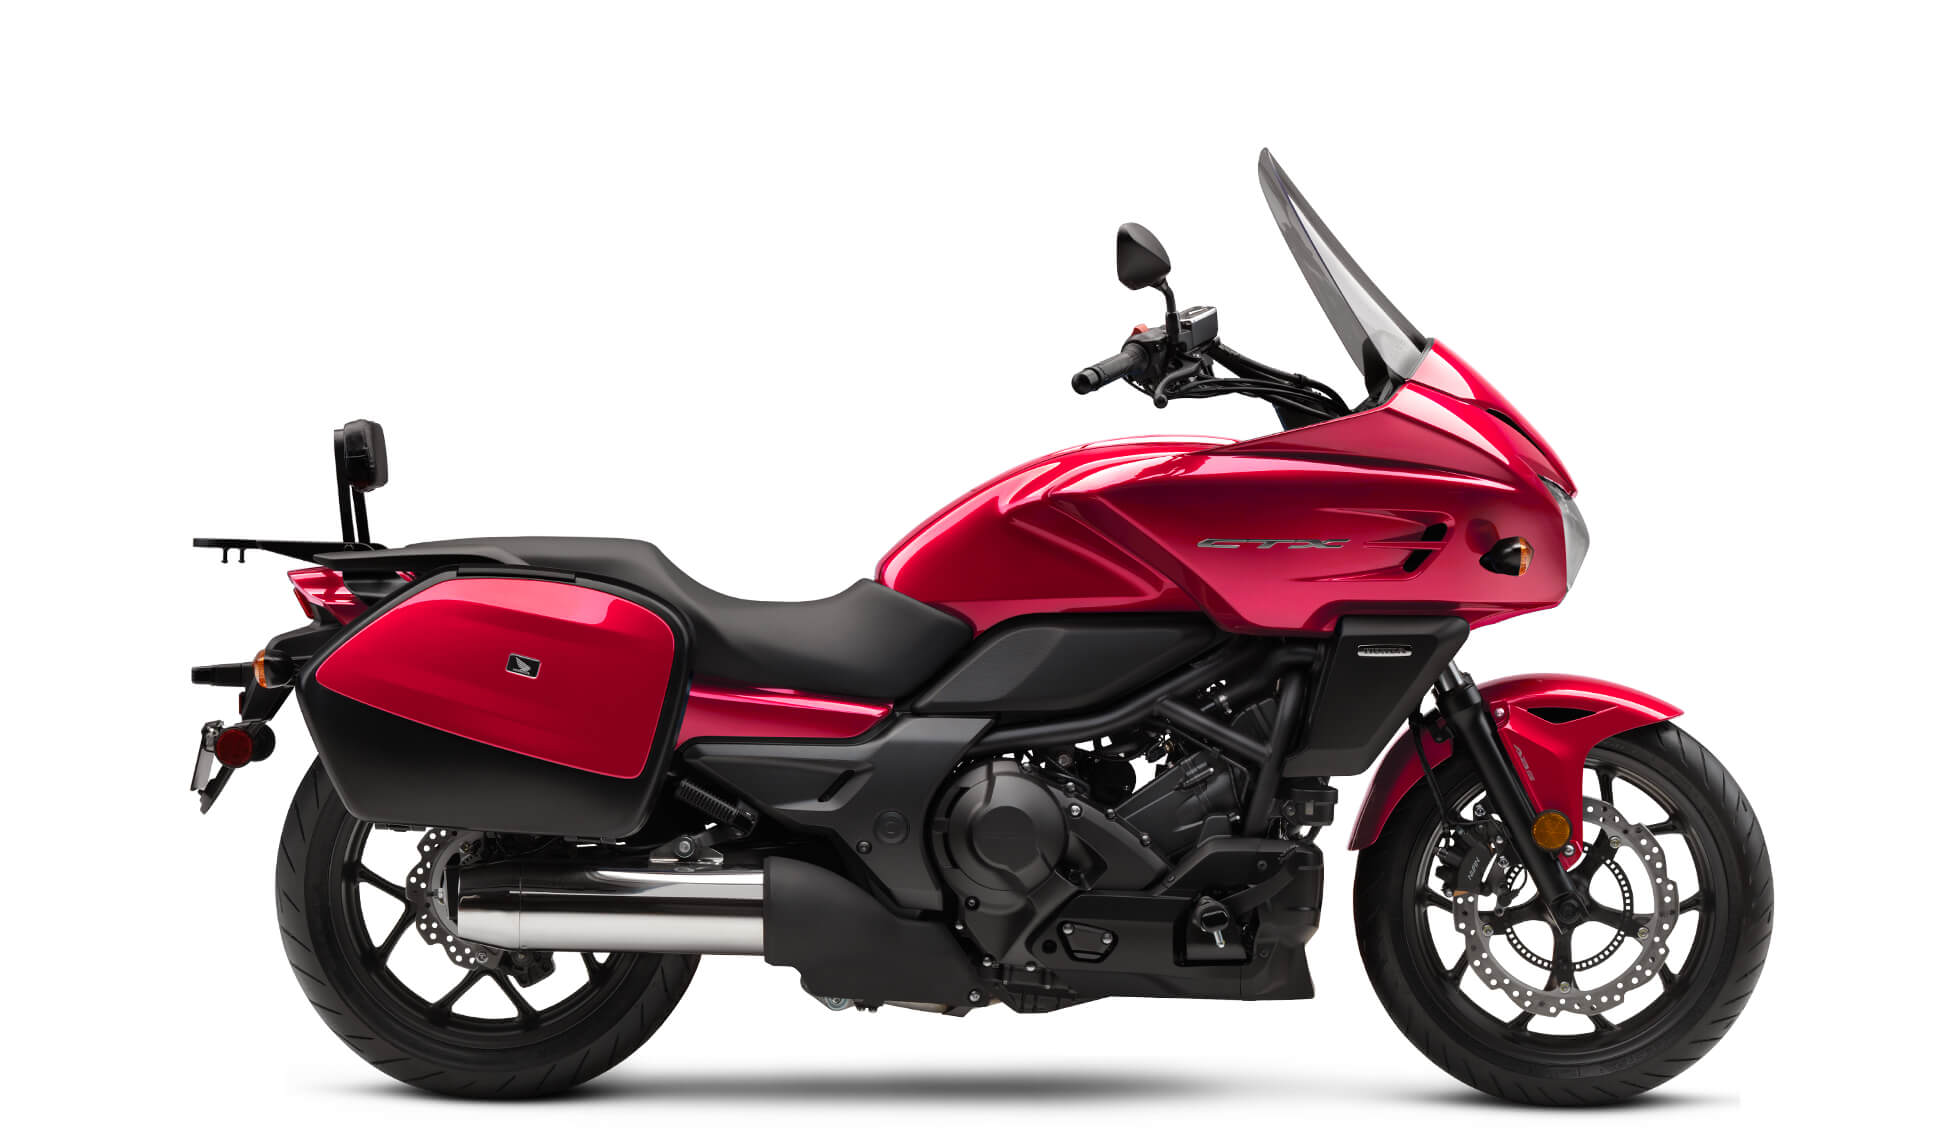 New Touring Motorcycles 2021 Cheap Retailers, Save 58% | jlcatj.gob.mx